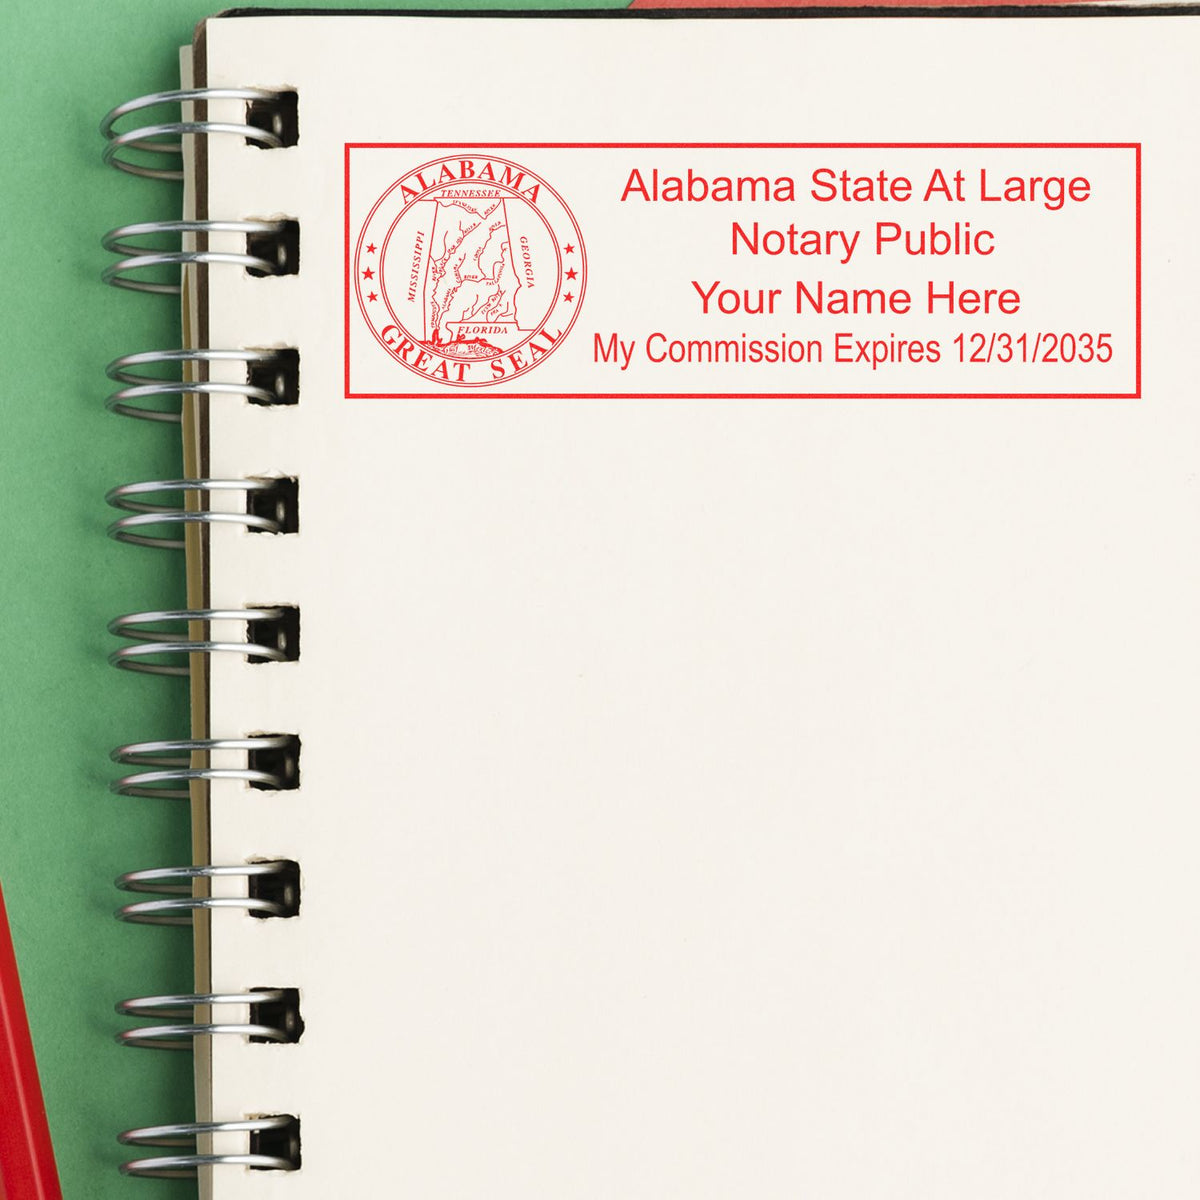 An alternative view of the Slim Pre-Inked State Seal Notary Stamp for Alabama stamped on a sheet of paper showing the image in use